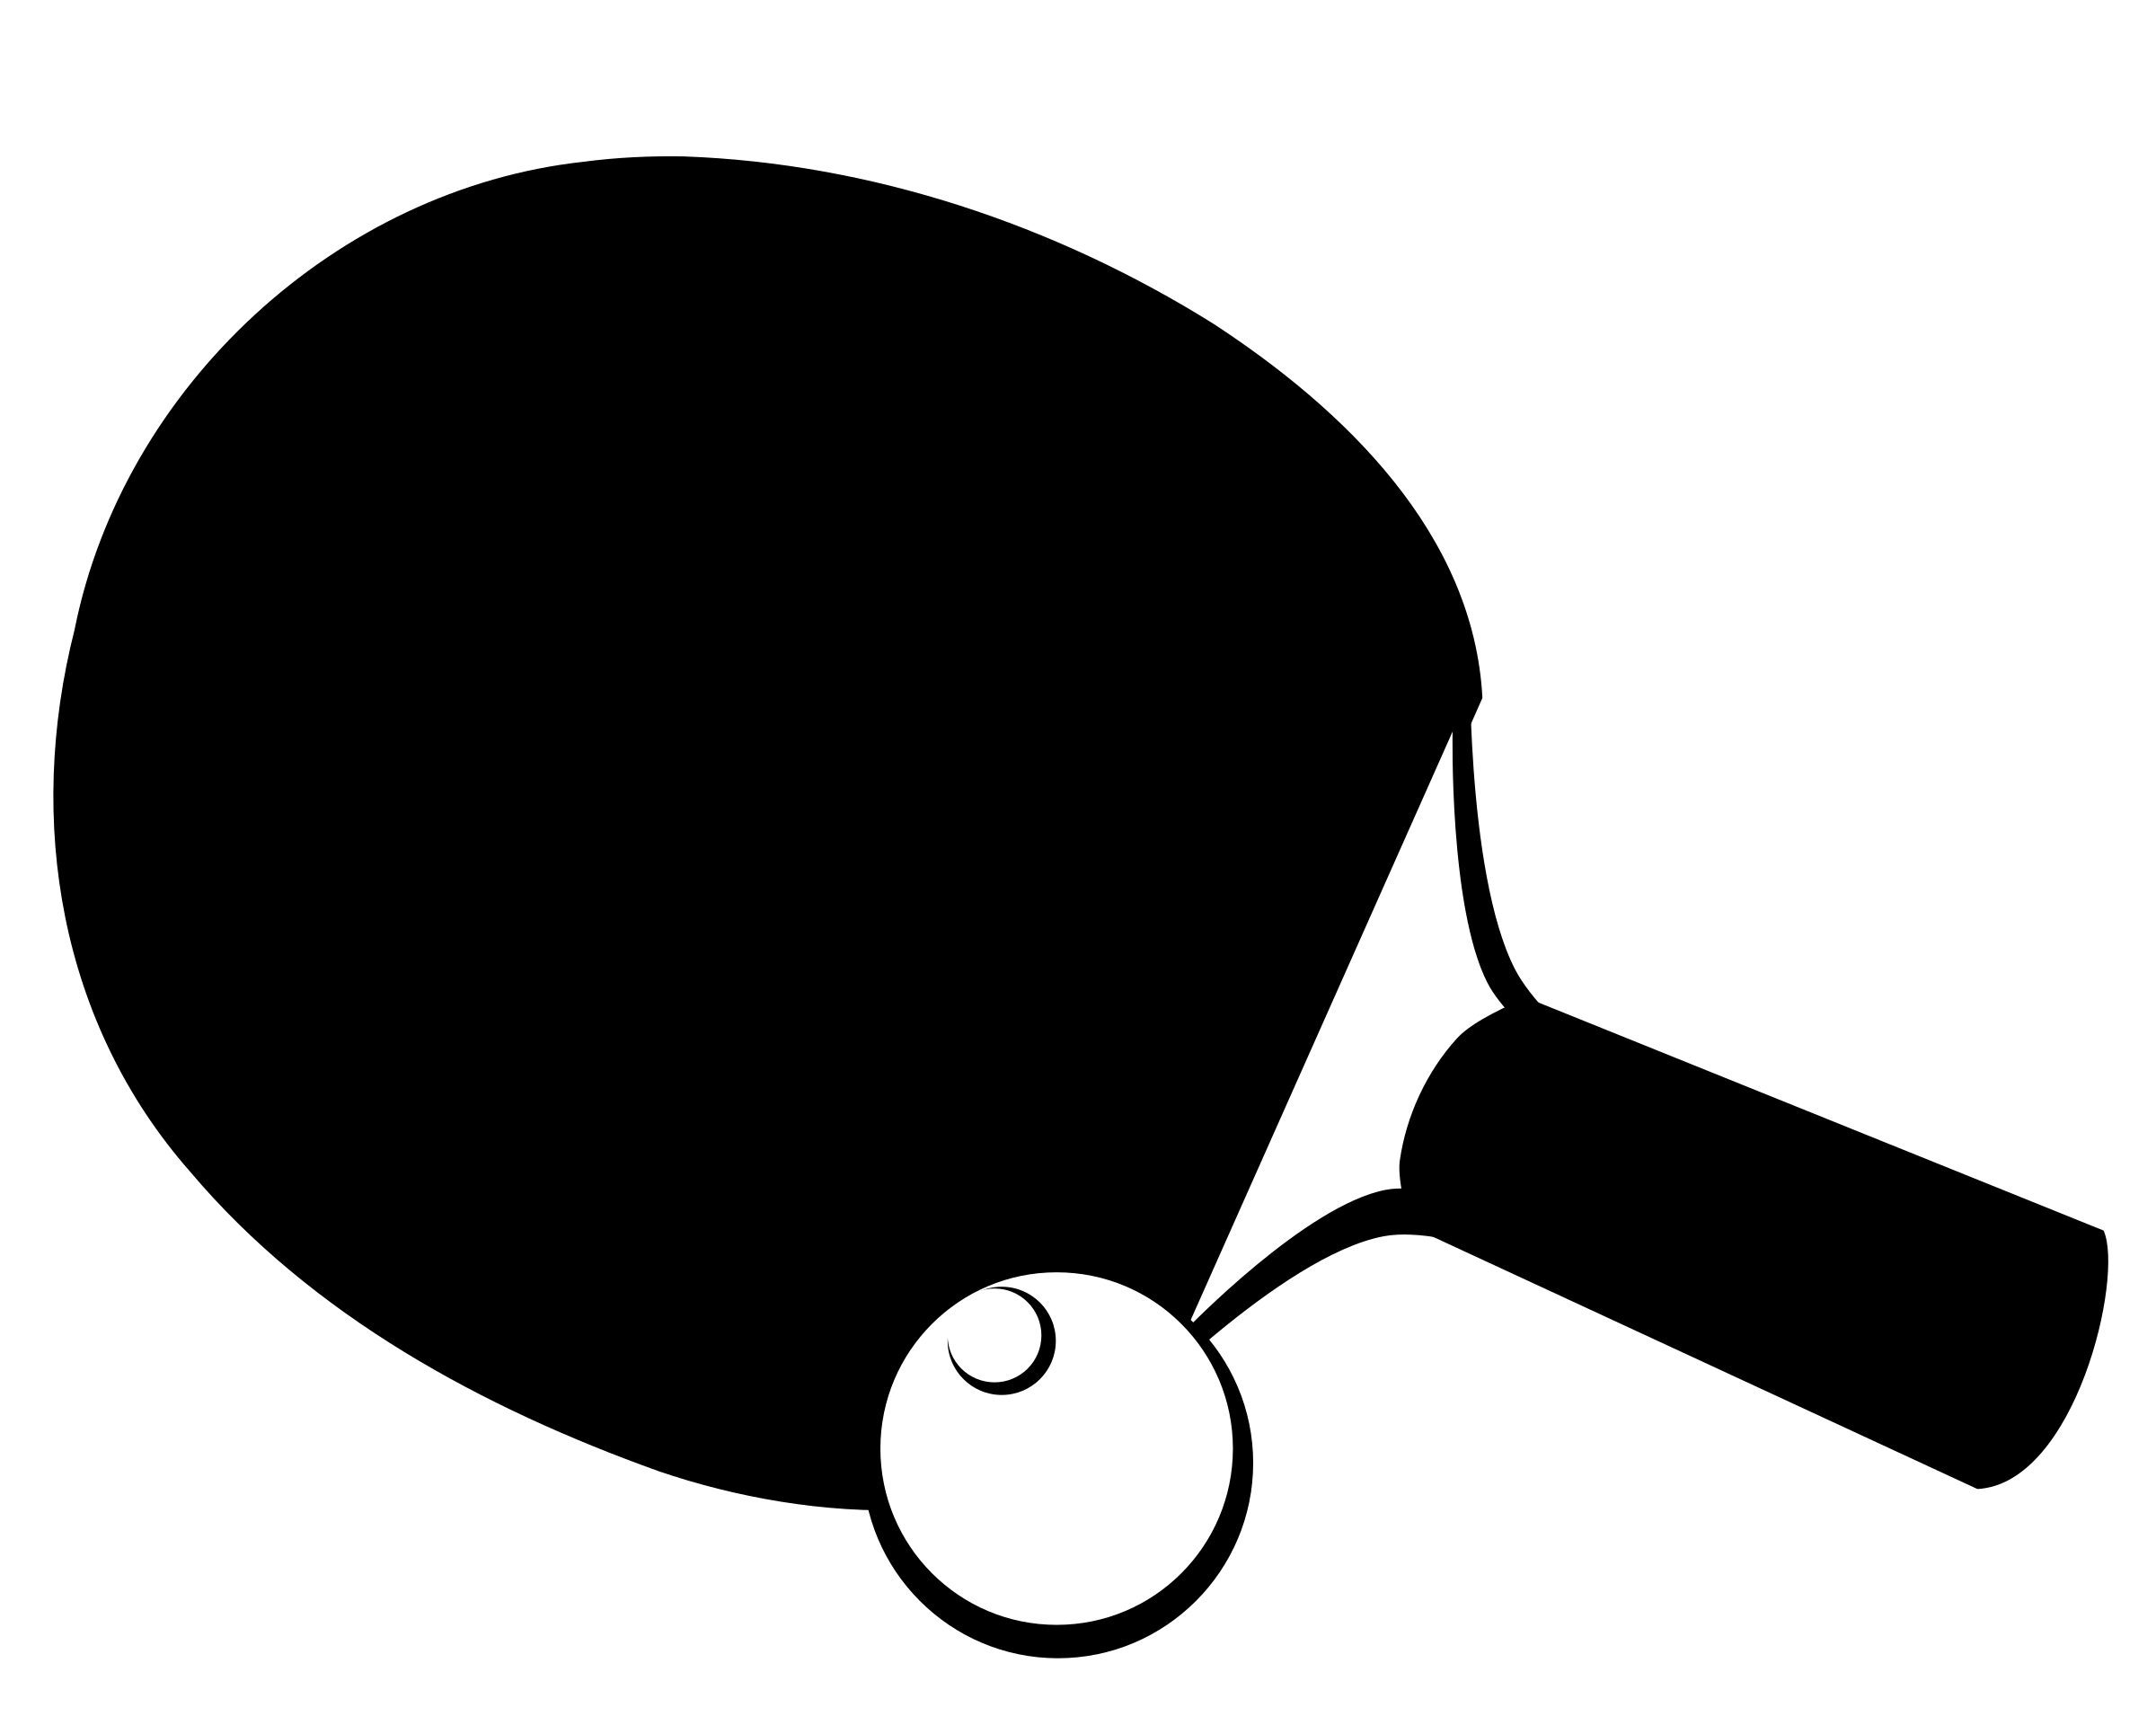 Ping pong clipart black and white